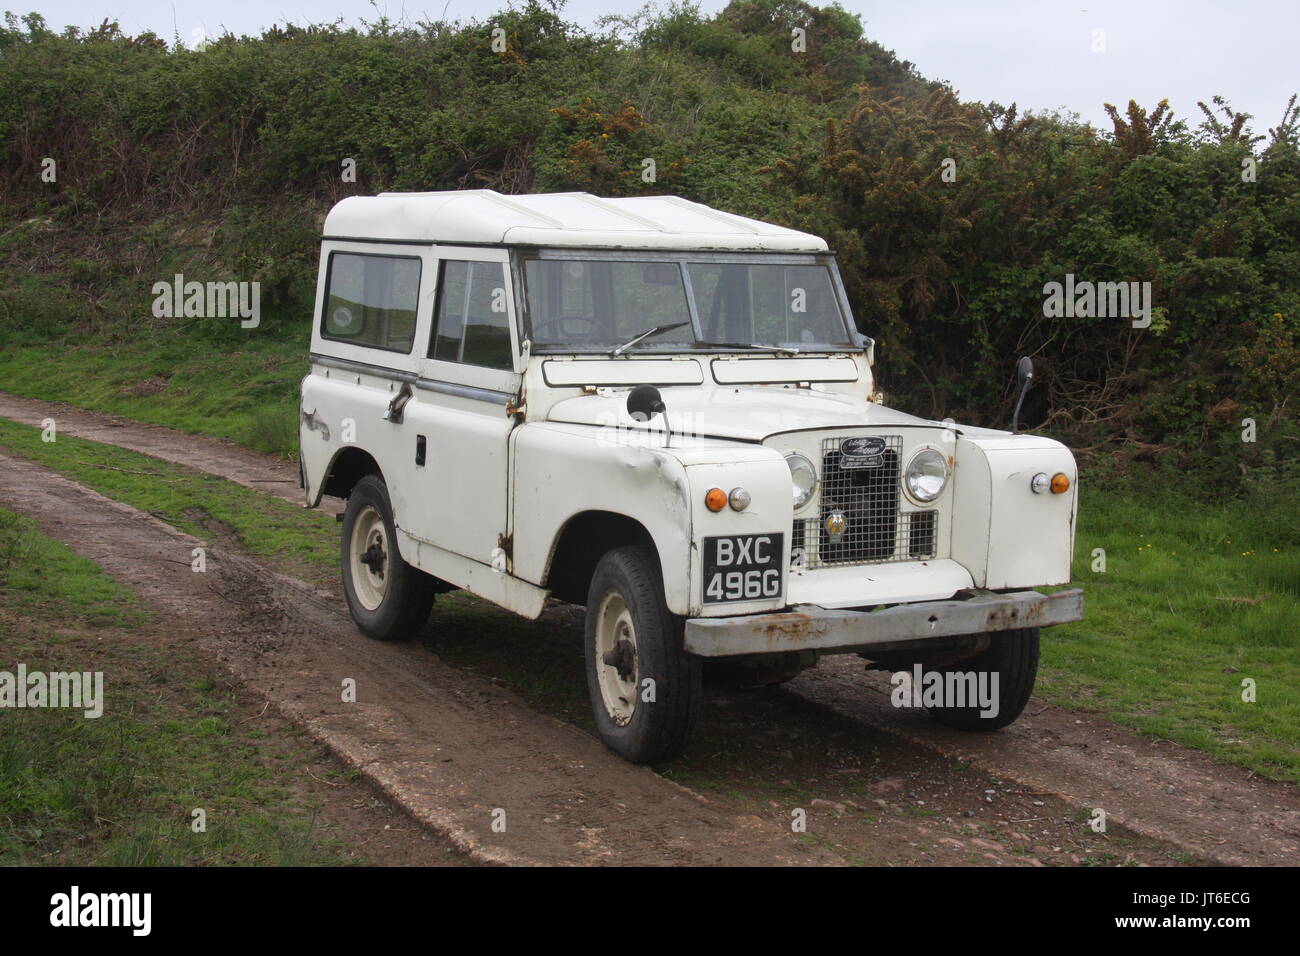 A VINTAGE WHITE LAND ROVER STATION WAGON ON A FARM TRACK Stock Photo